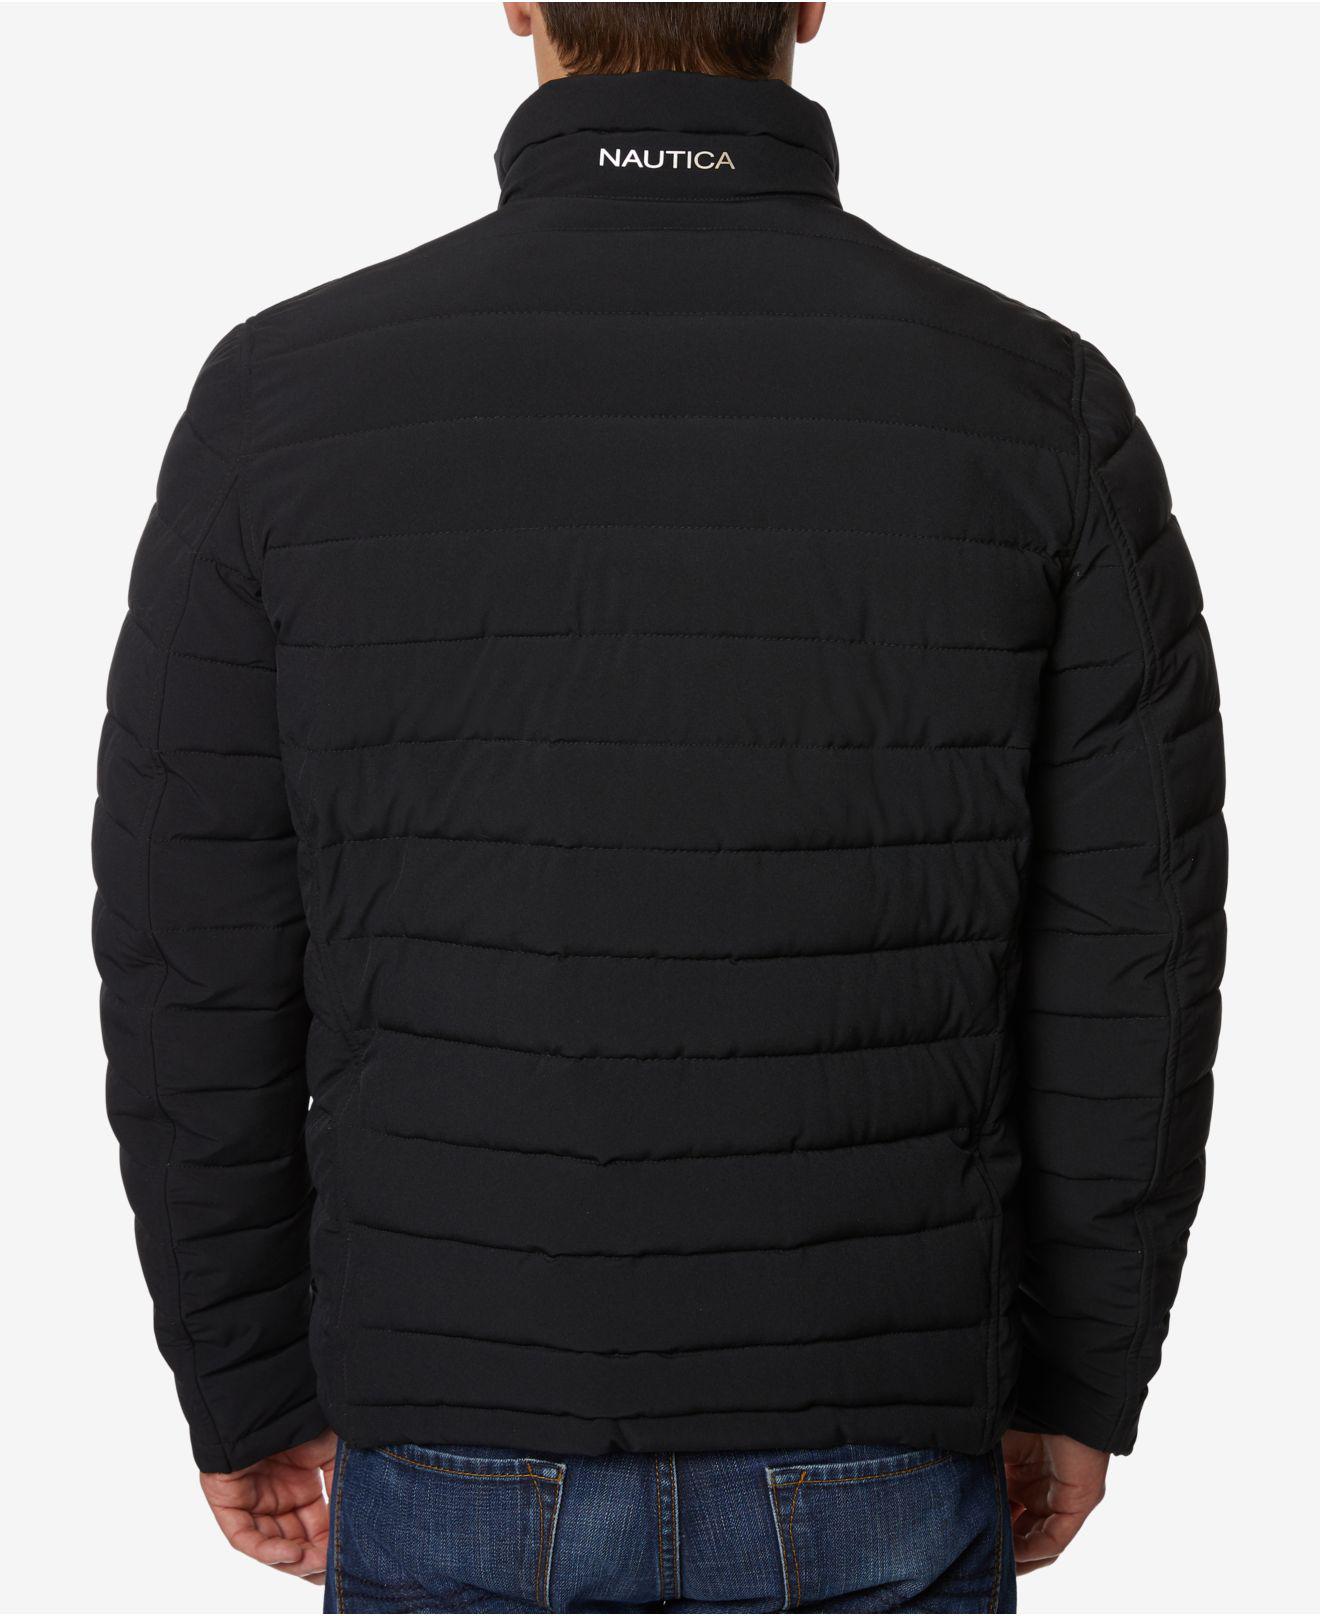 Nautica Synthetic Big & Tall Stretch Reversible Jacket in Black/Grey ...